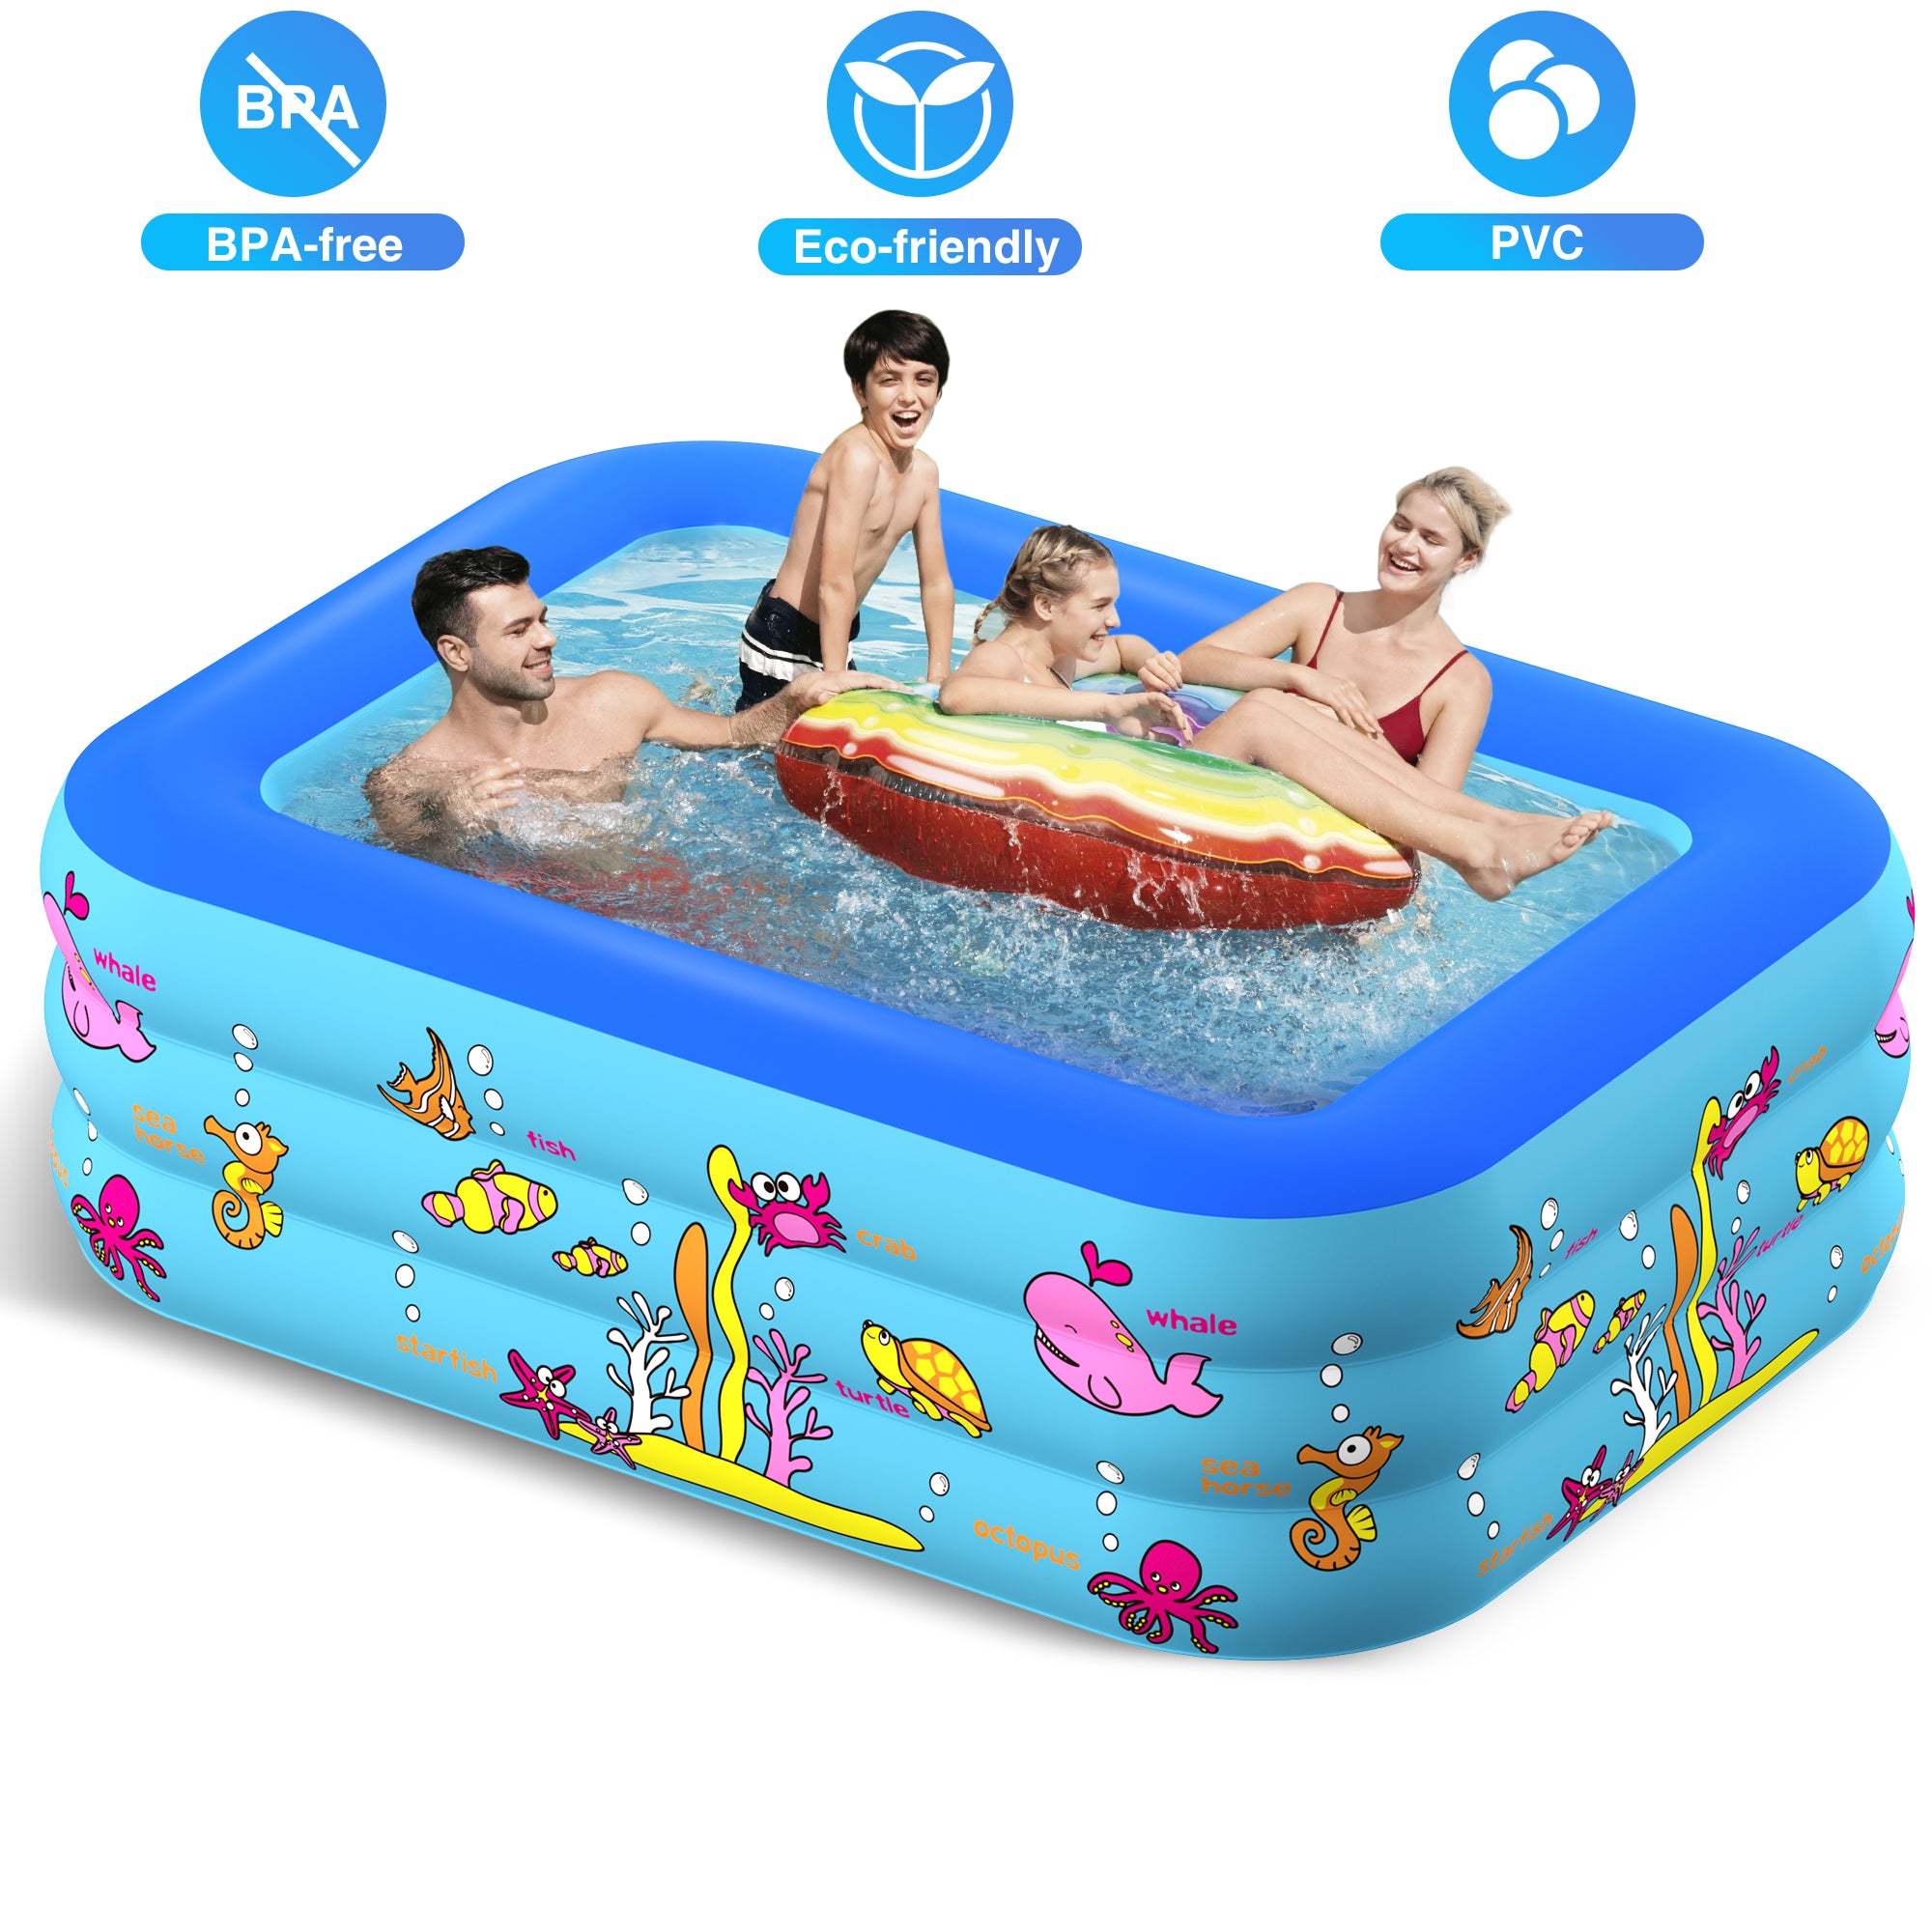 Inflatable Swimming Pool, 87" x 57" x 25" Durable Backyard Blow Up Lounge Pool with Pump, Full-Sized Inflatable Pool for Kids, Adults, Outdoor, Backyard, Summer Water Party,J320